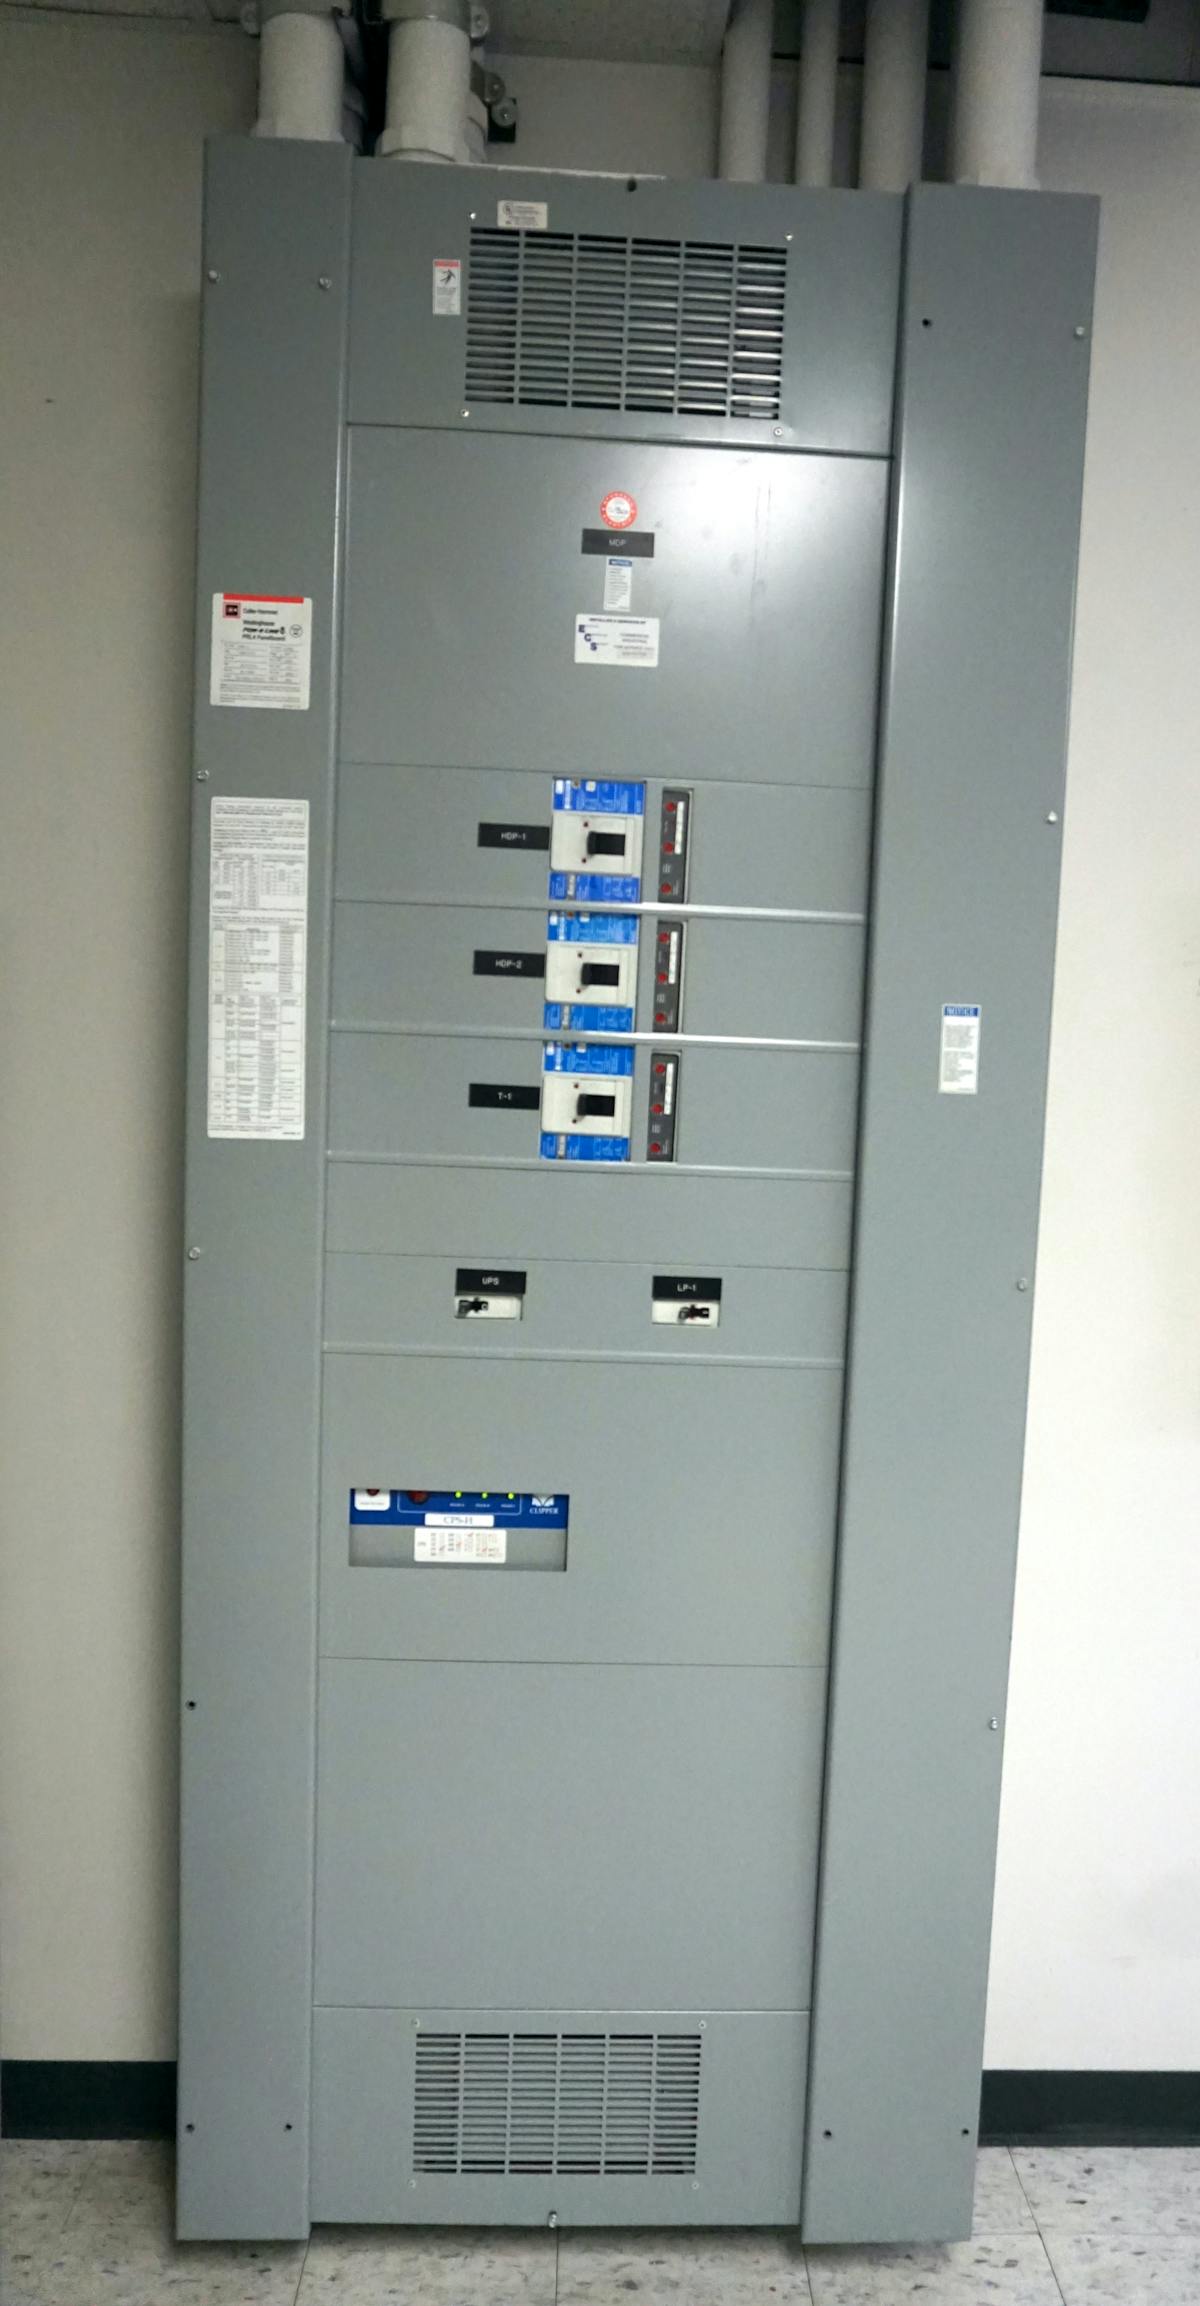 Photo 1. This 480V, 3-phase switchboard must be placed into an electrically safe work condition to remove the front cover and replace a breaker. Several bolts securing the front cover are missing, which would prevent the normal operation of the breakers. Missing bolts will be replaced when the work is completed.